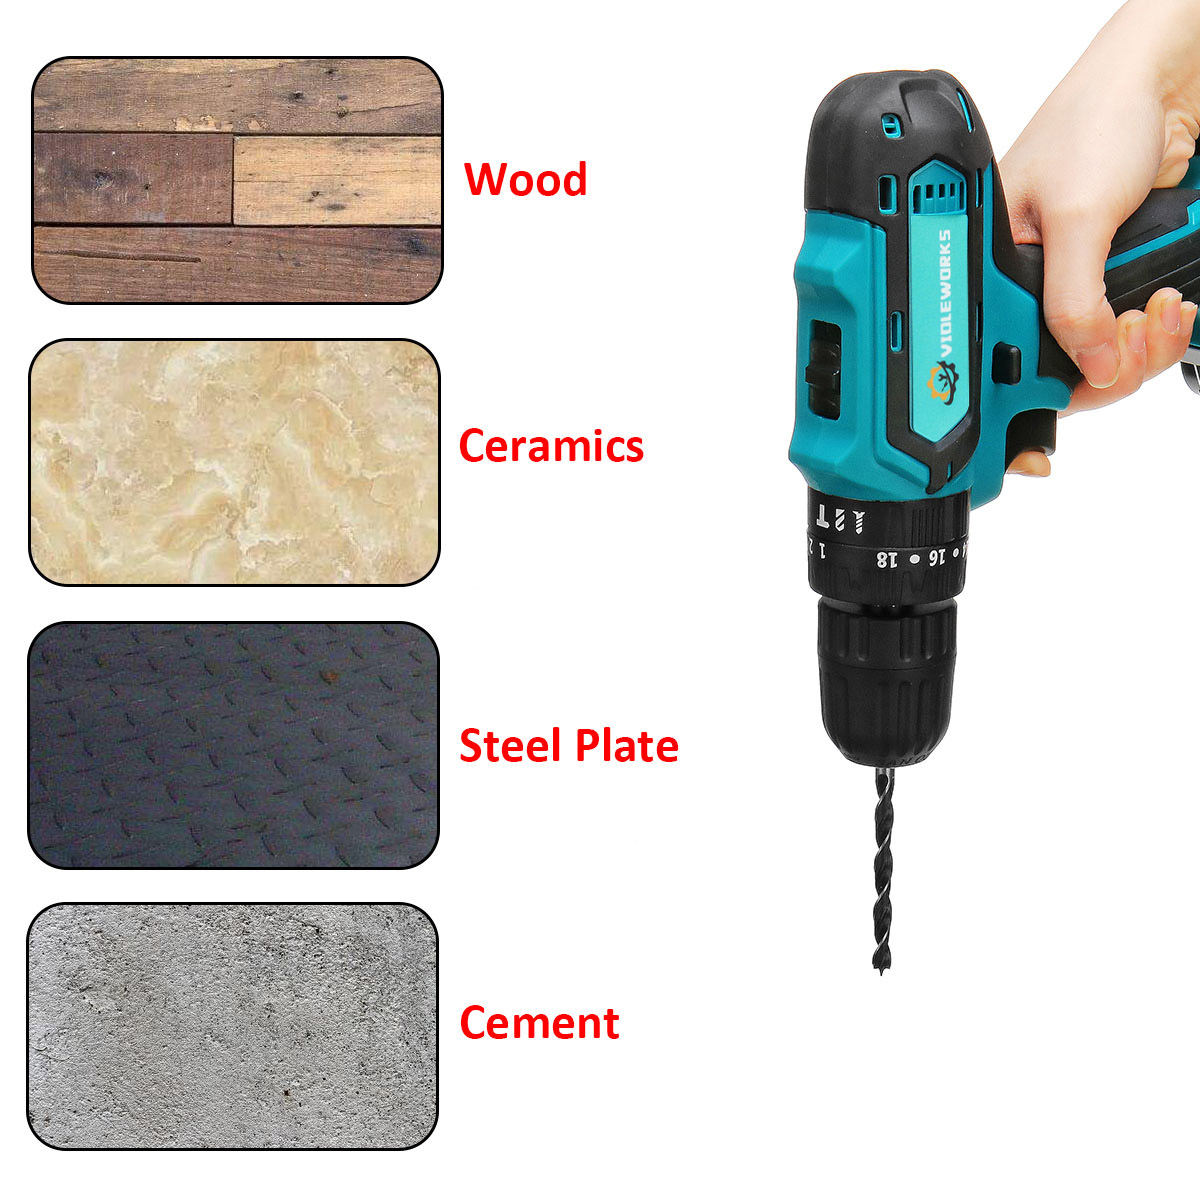 2-Speed-Power-Drills-6000mah-Cordless-Drill-3-IN-1-Electric-Screwdriver-Hammer-Drill-with-2pcs-Batte-1416071-2